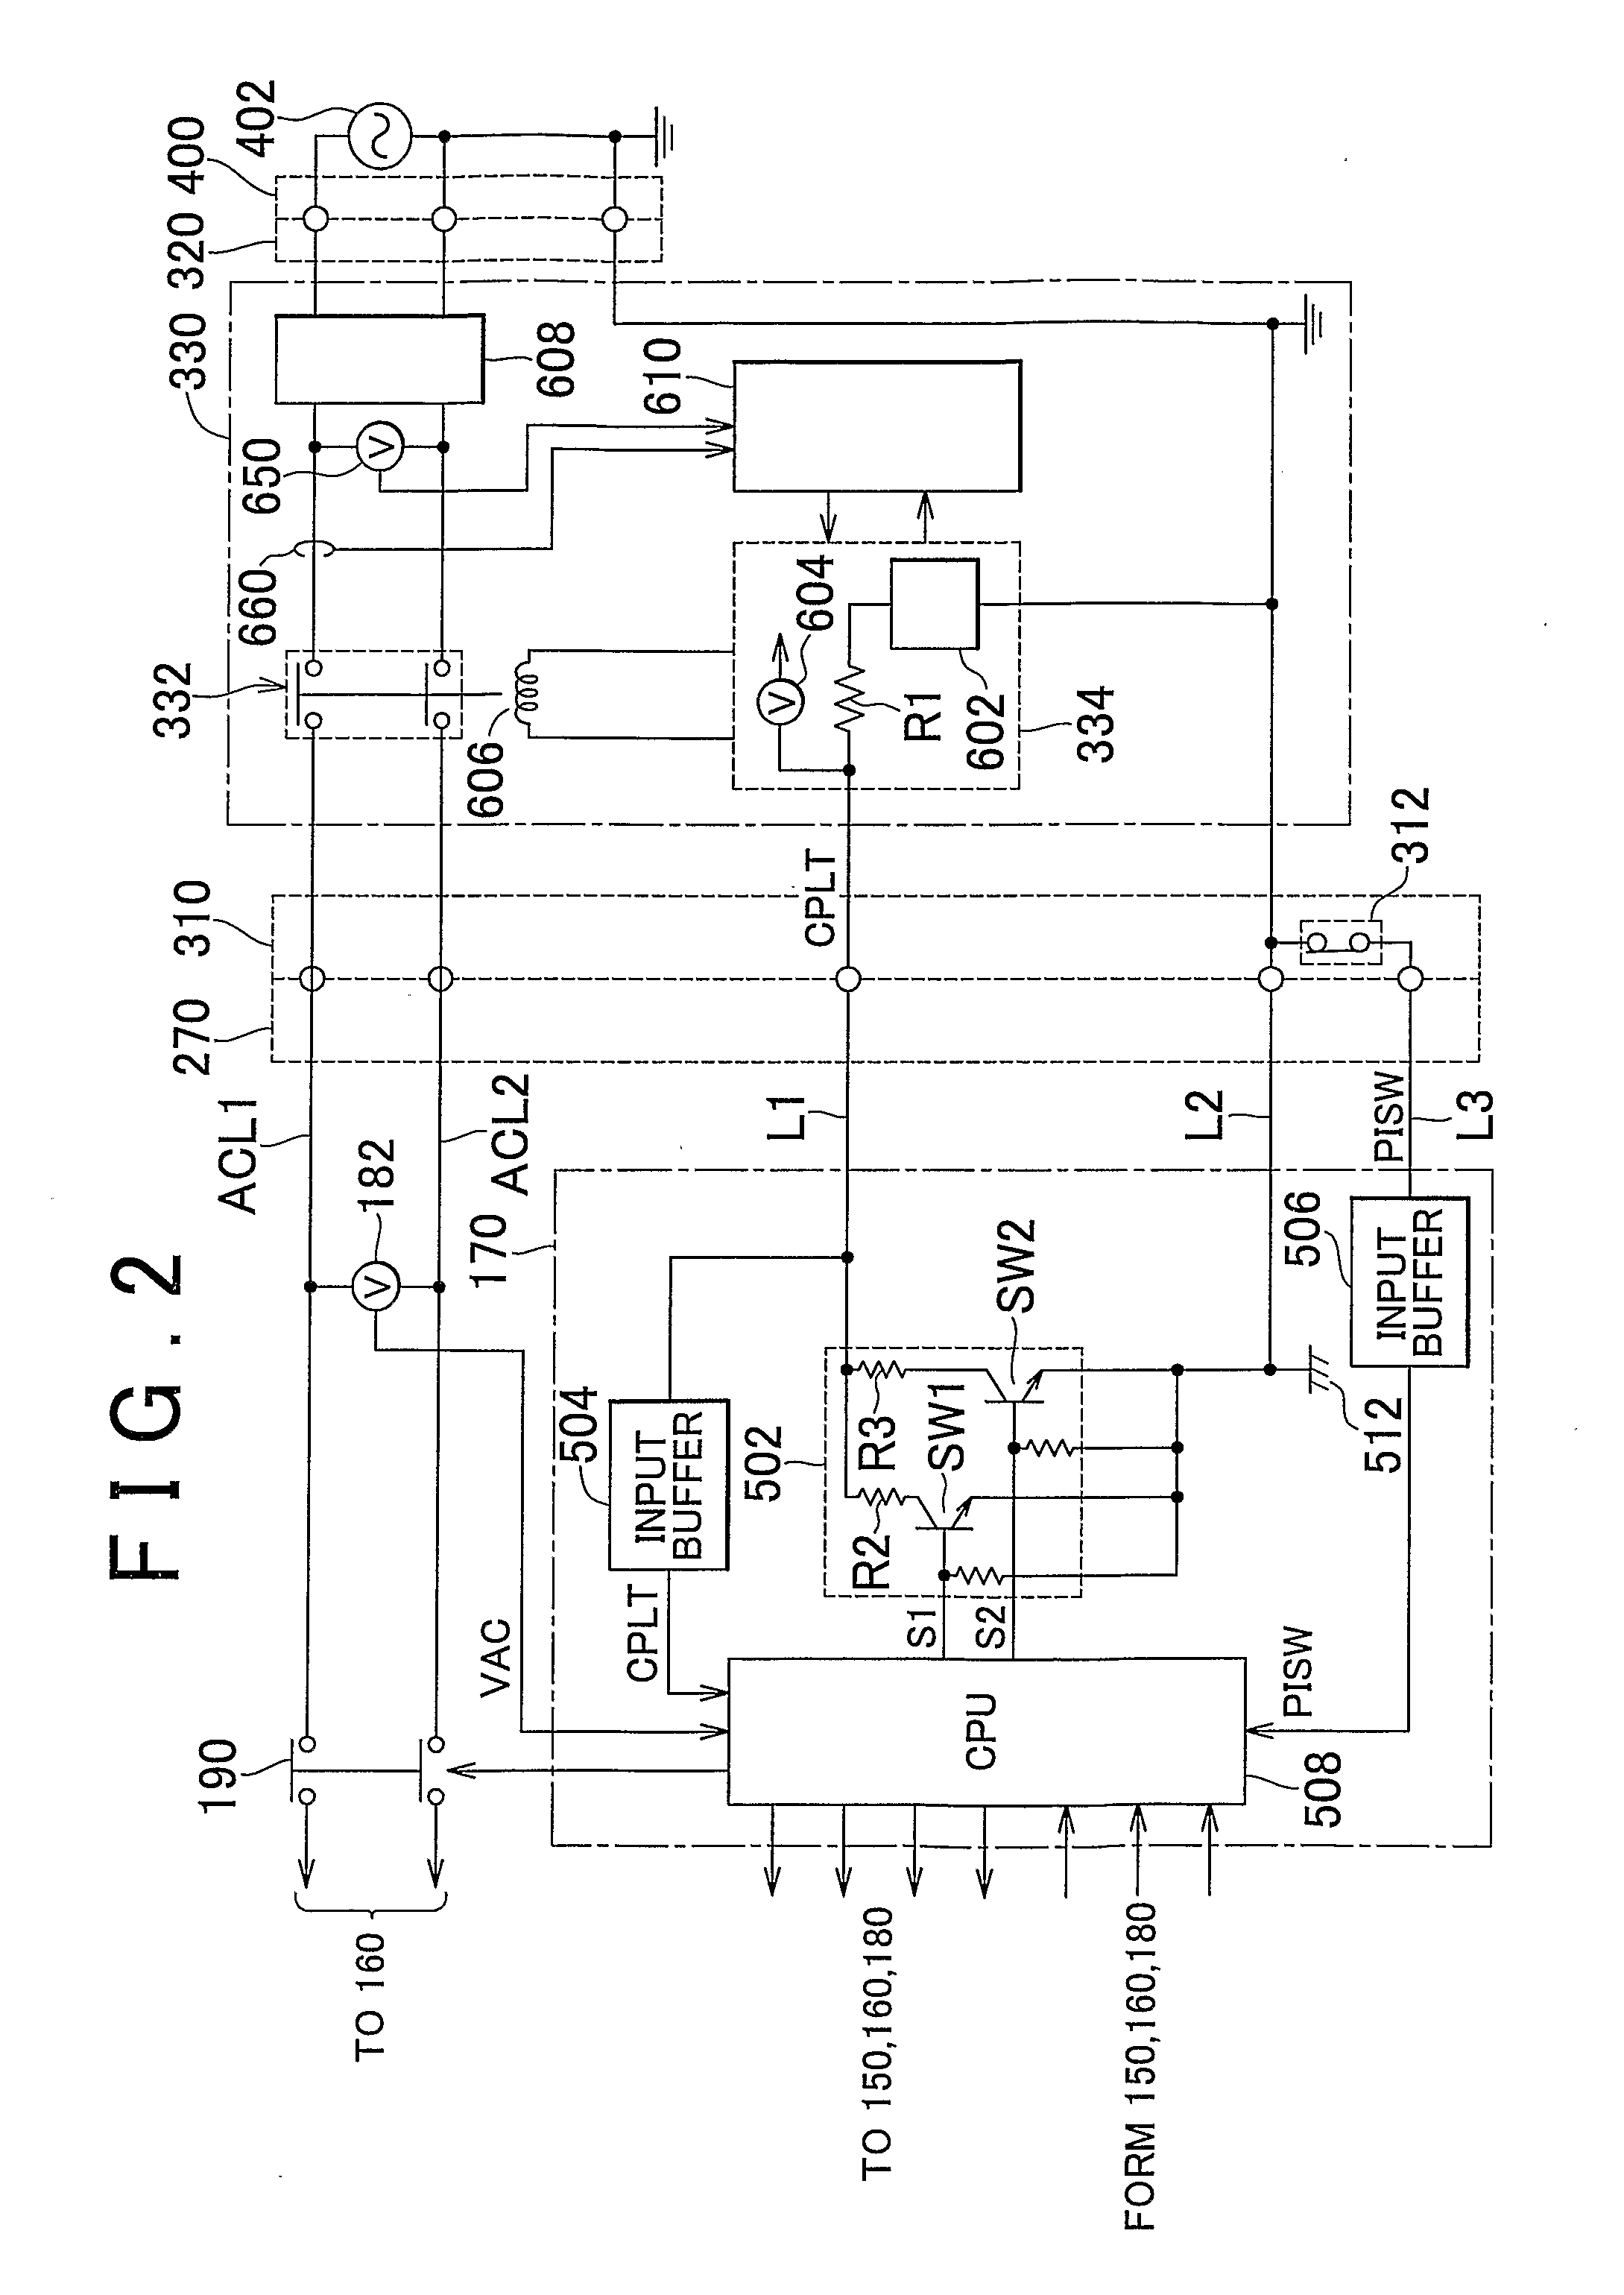 Charging cable for electric vehicle and method of controlling charging cable